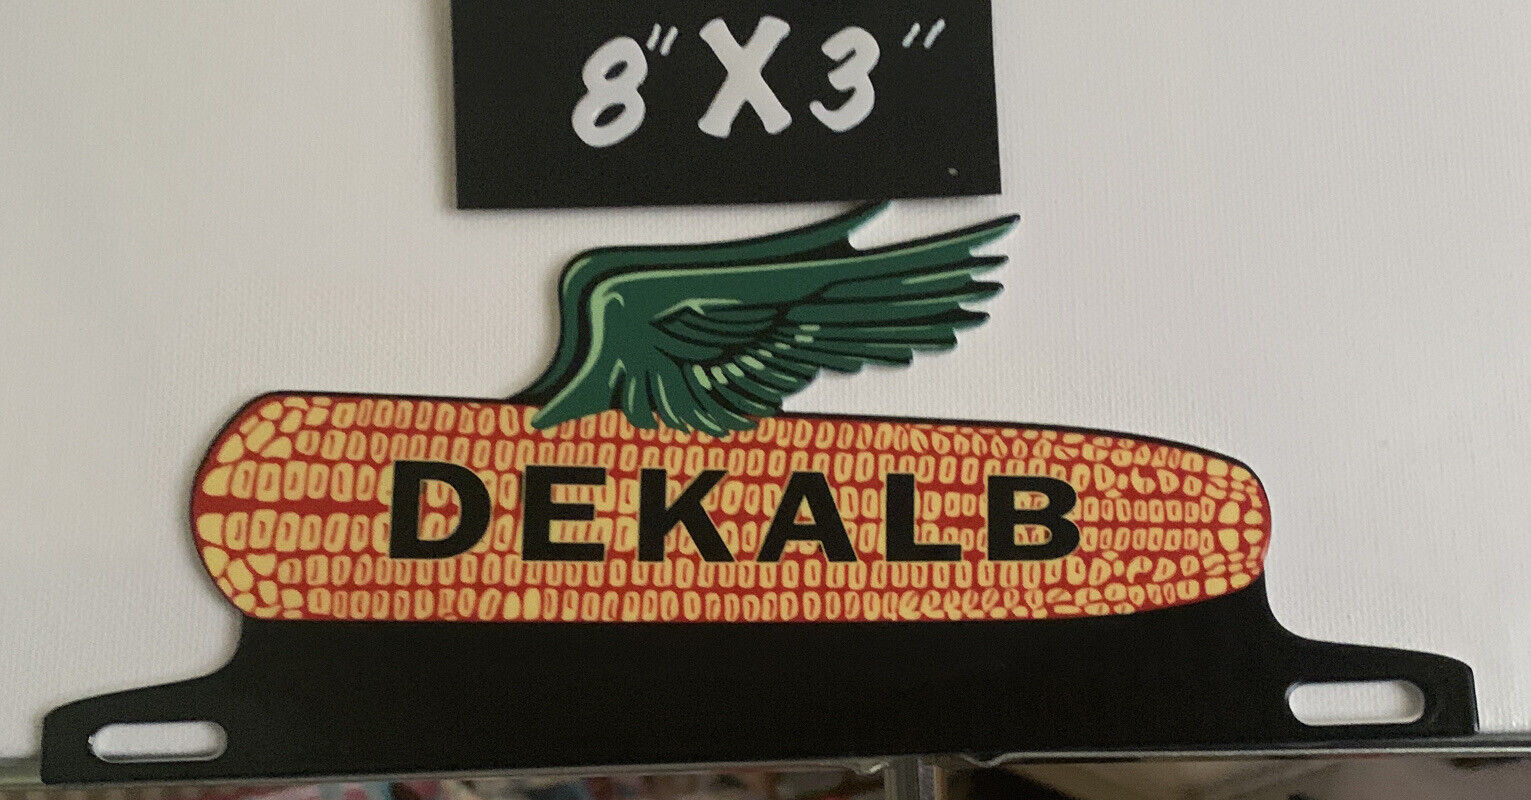 DEKALB Porcelain Like Plate Topper Agriculture Service Feed Seed Farm Gas Oil